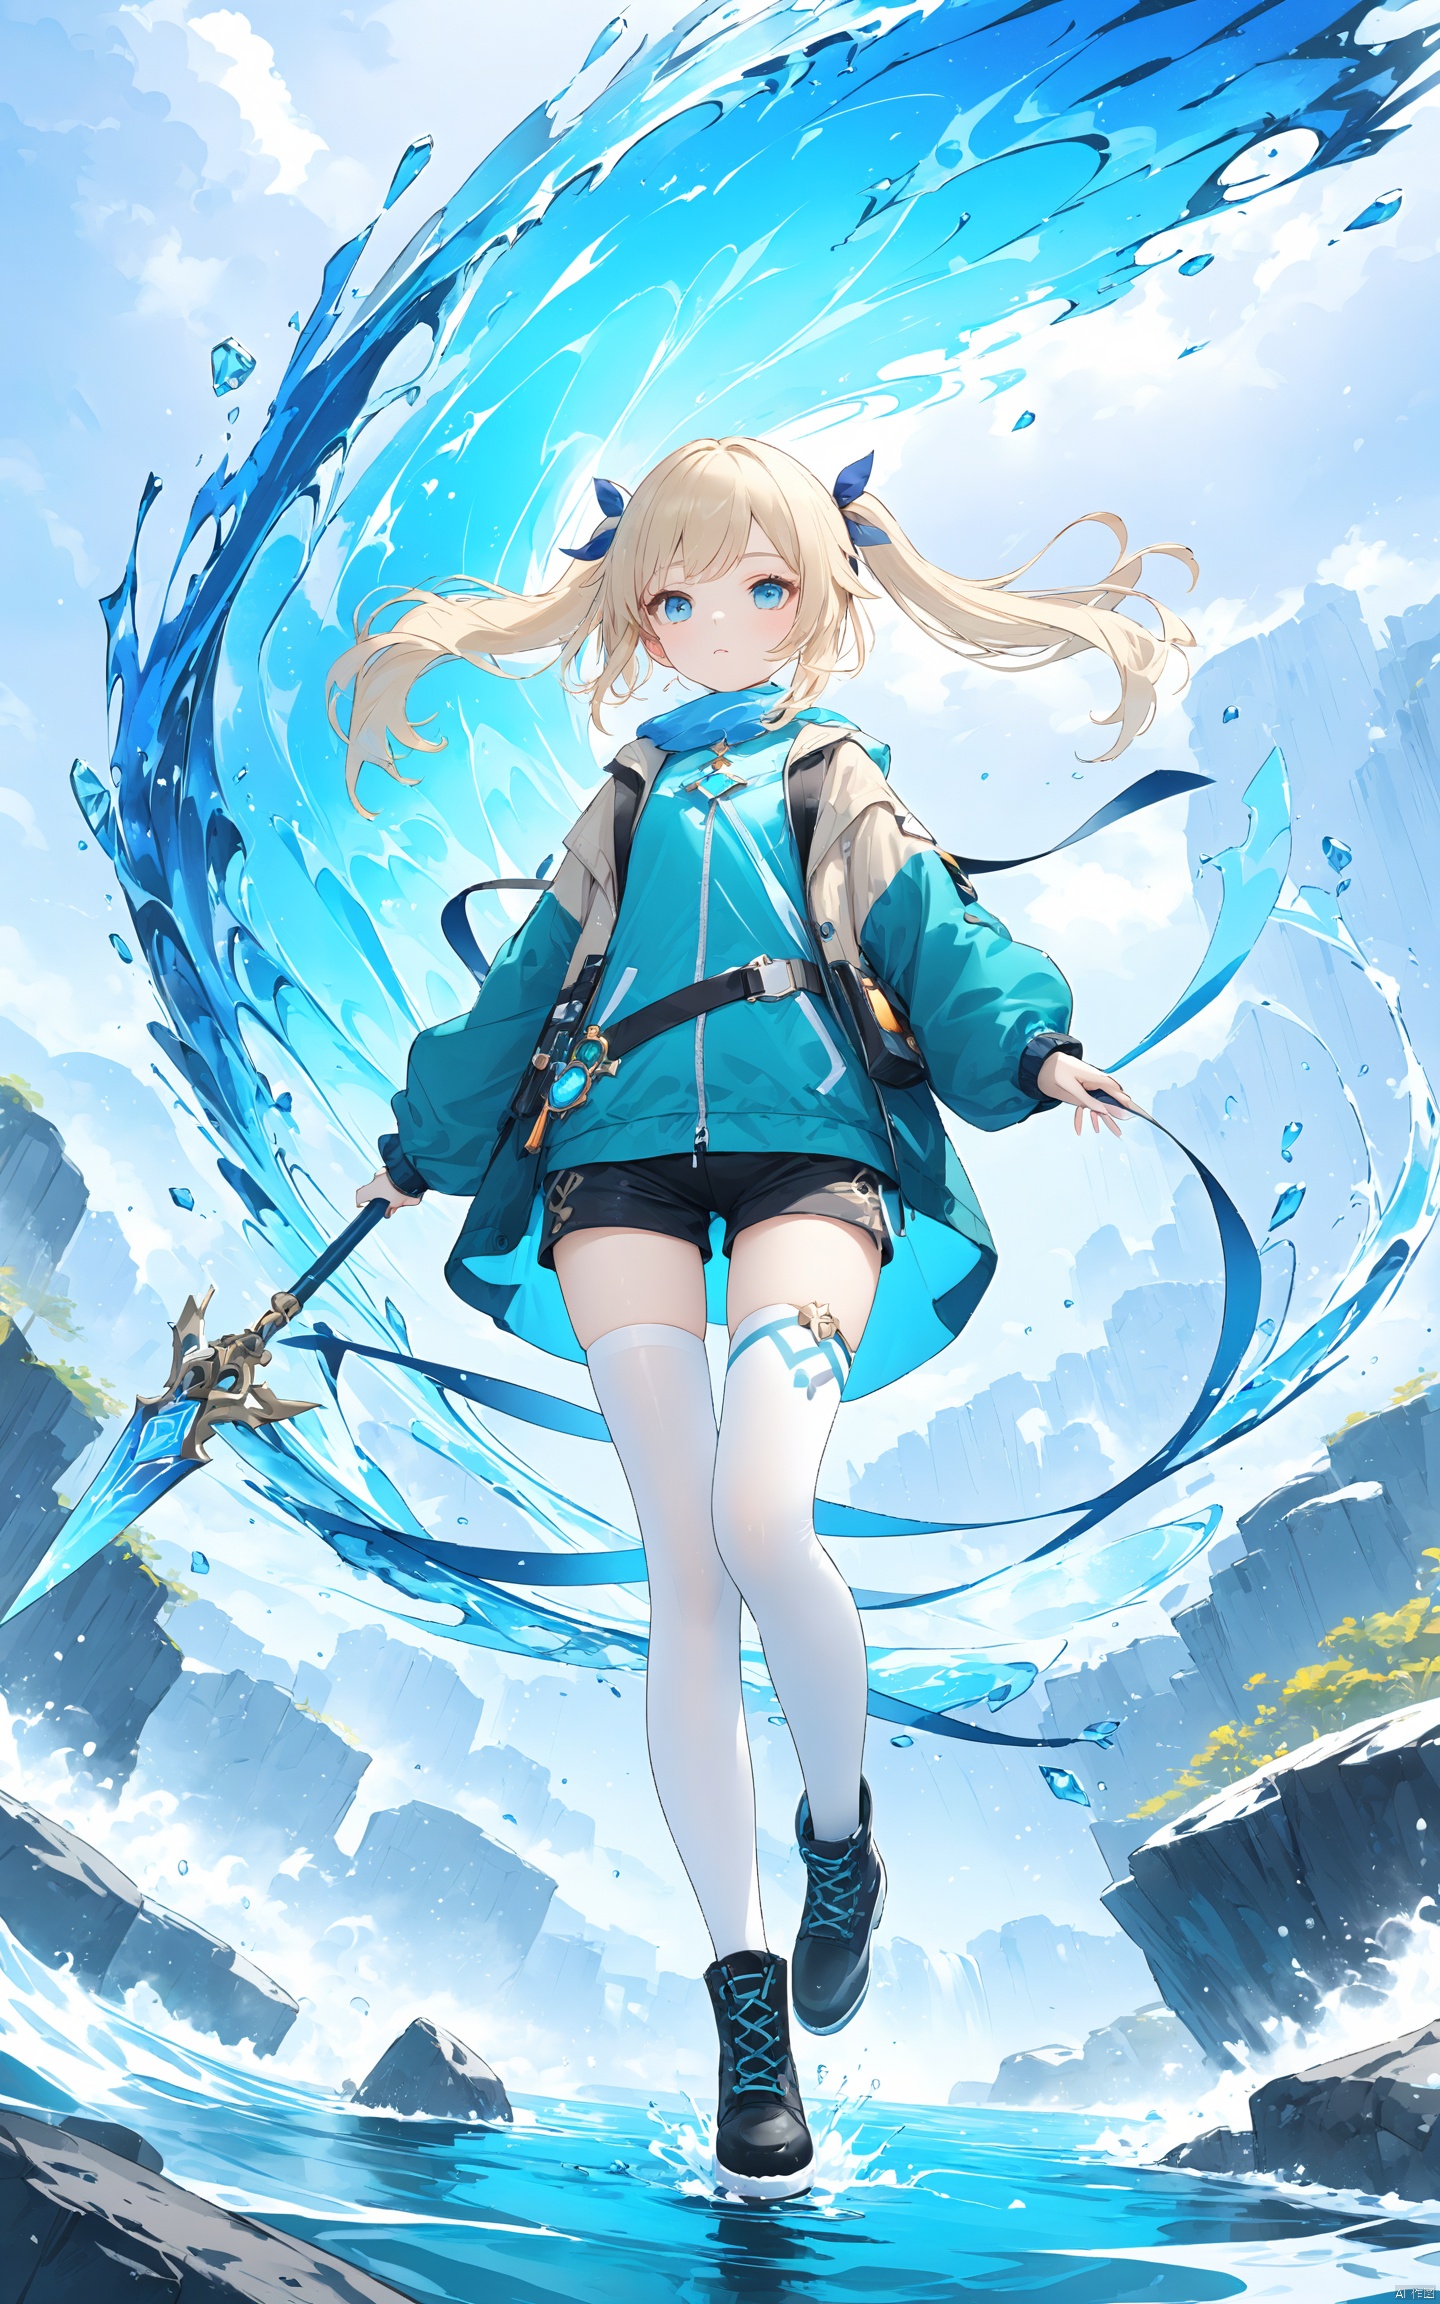 (Masterpiece), (Best Quality), Illustration, Super Detailed, hdr, Depth of Field, (Color), (White Stockings),1 character, Genshin Impact inspired, full body view, female traveler, elemental adept wielding Anemo powers, wears a custom-made adventurer's outfit consisting of a lightweight windbreaker jacket in shades of turquoise and beige, adorned with fluttering scarf and flowing tails, matching knee-length shorts and leggings, flexible ankle-high boots suitable for traversal, iconic Vision of Anemo embedded as a brooch on her chest, holding a transparent Elemental Bow crafted from Anemo crystals, her waist-length blond hair styled in twin ponytails secured with blue ribbon ties, piercing azure eyes reflecting determination, positioned on a floating islet amidst swirling gusts of wind, harnessing the power of the elements.